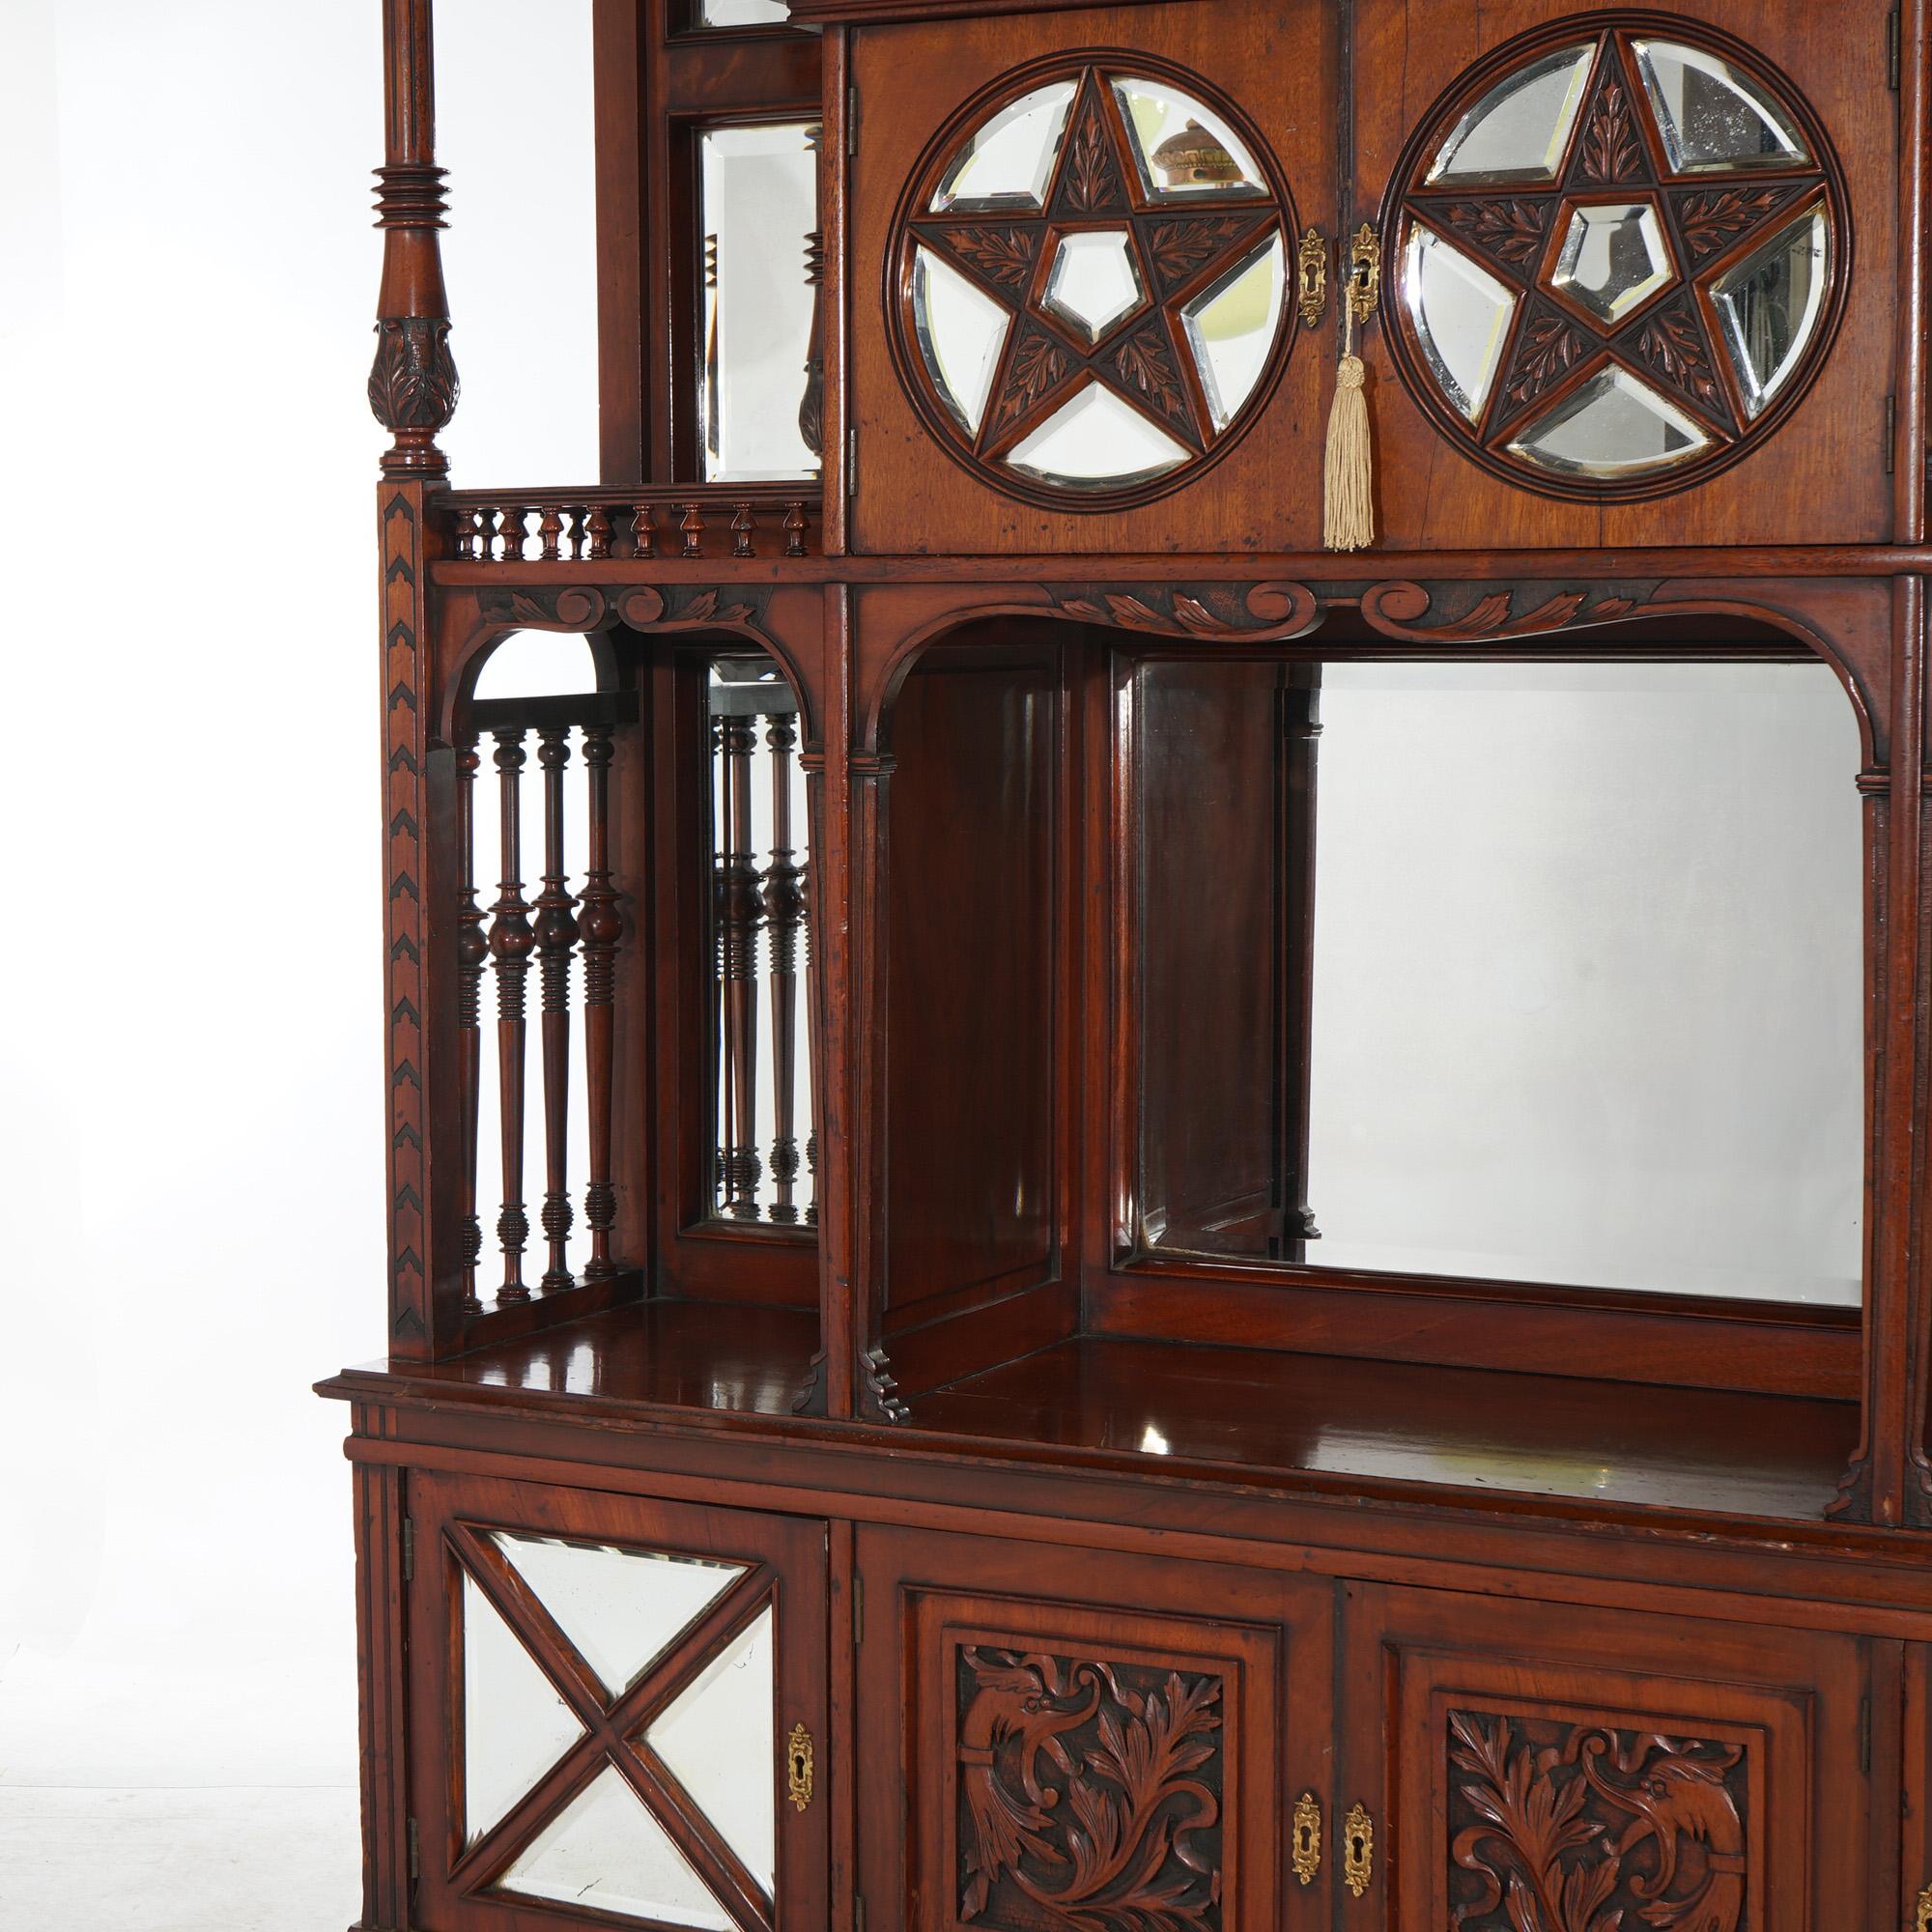 ***Ask About Reduced In-House Delivery Rates - Reliable Professional Service & Fully Insured***
Antique Mahogany Star Pentagram Etagere with Foliate Carved Pediment, Cabinets with Beveled Mirrors, Spindled Galleries & Lower Cabinets with Stylized